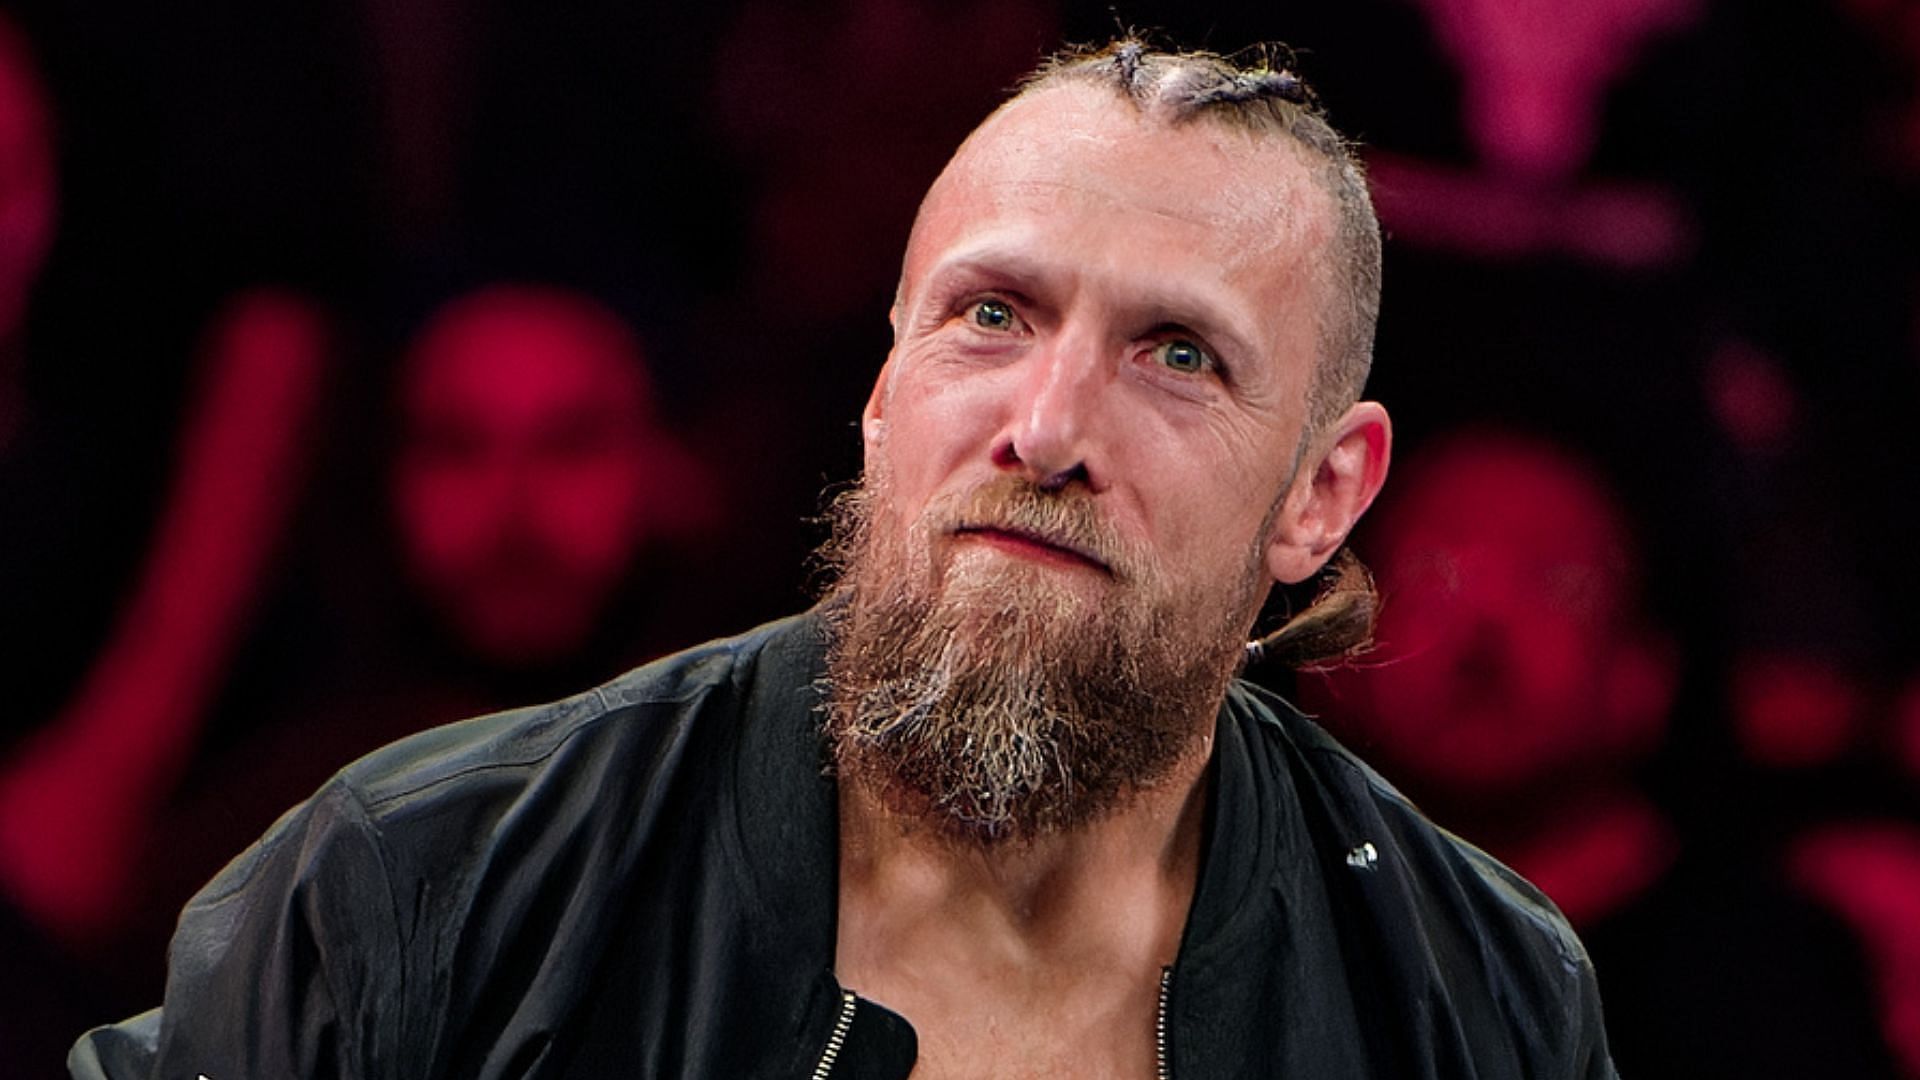 Bryan Danielson recently returned from an arm injury